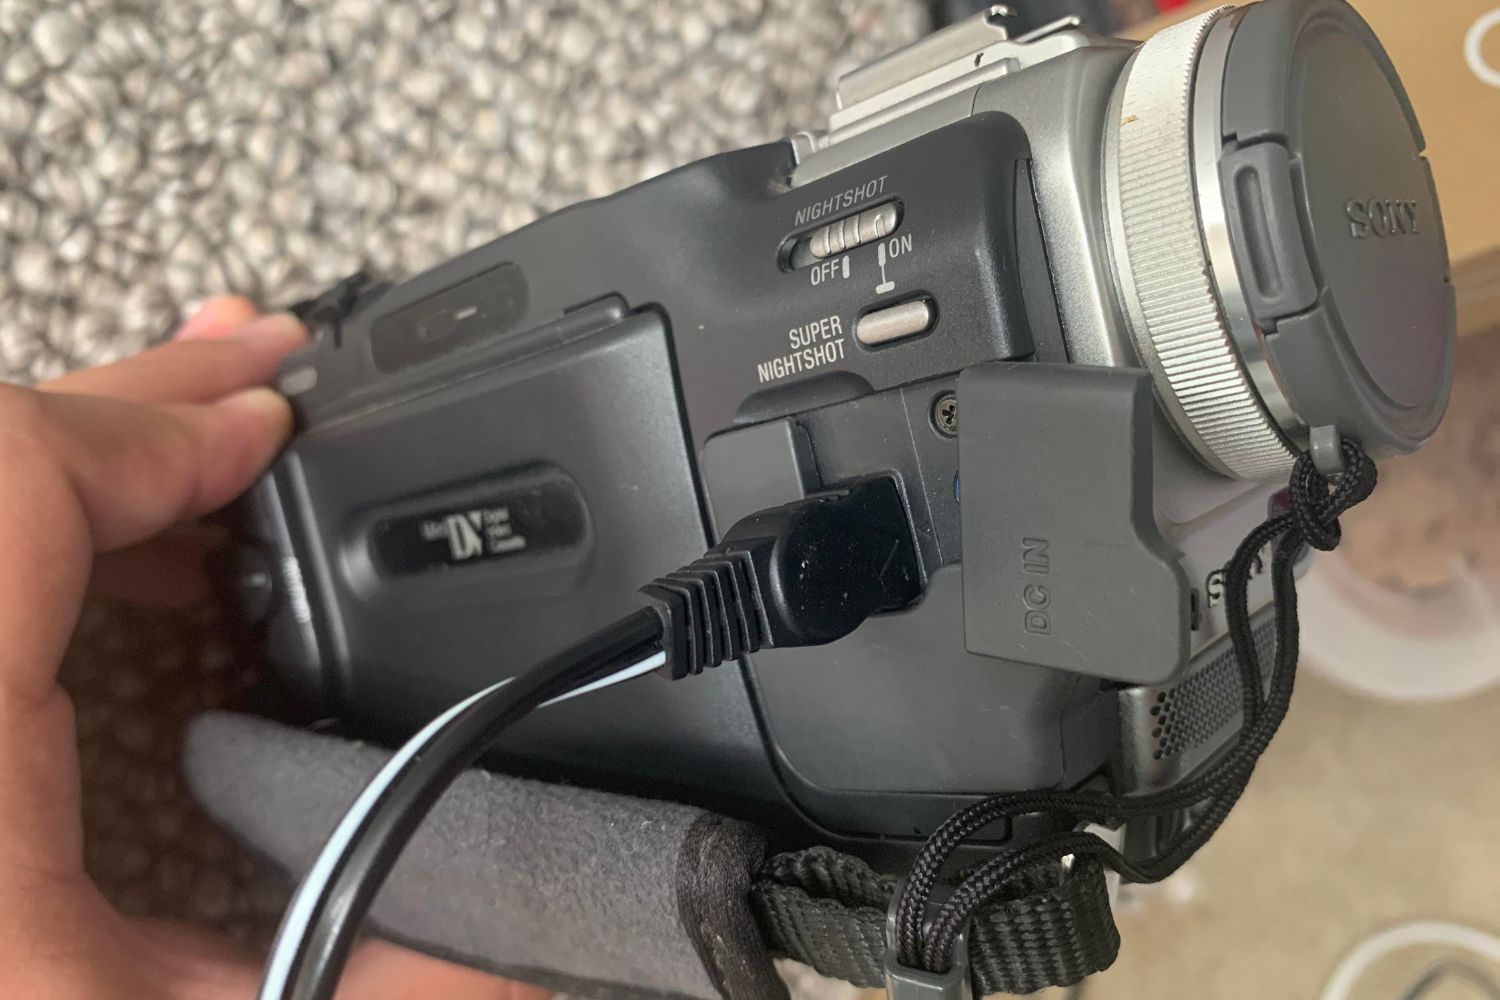 How To Charge A Sony Camcorder